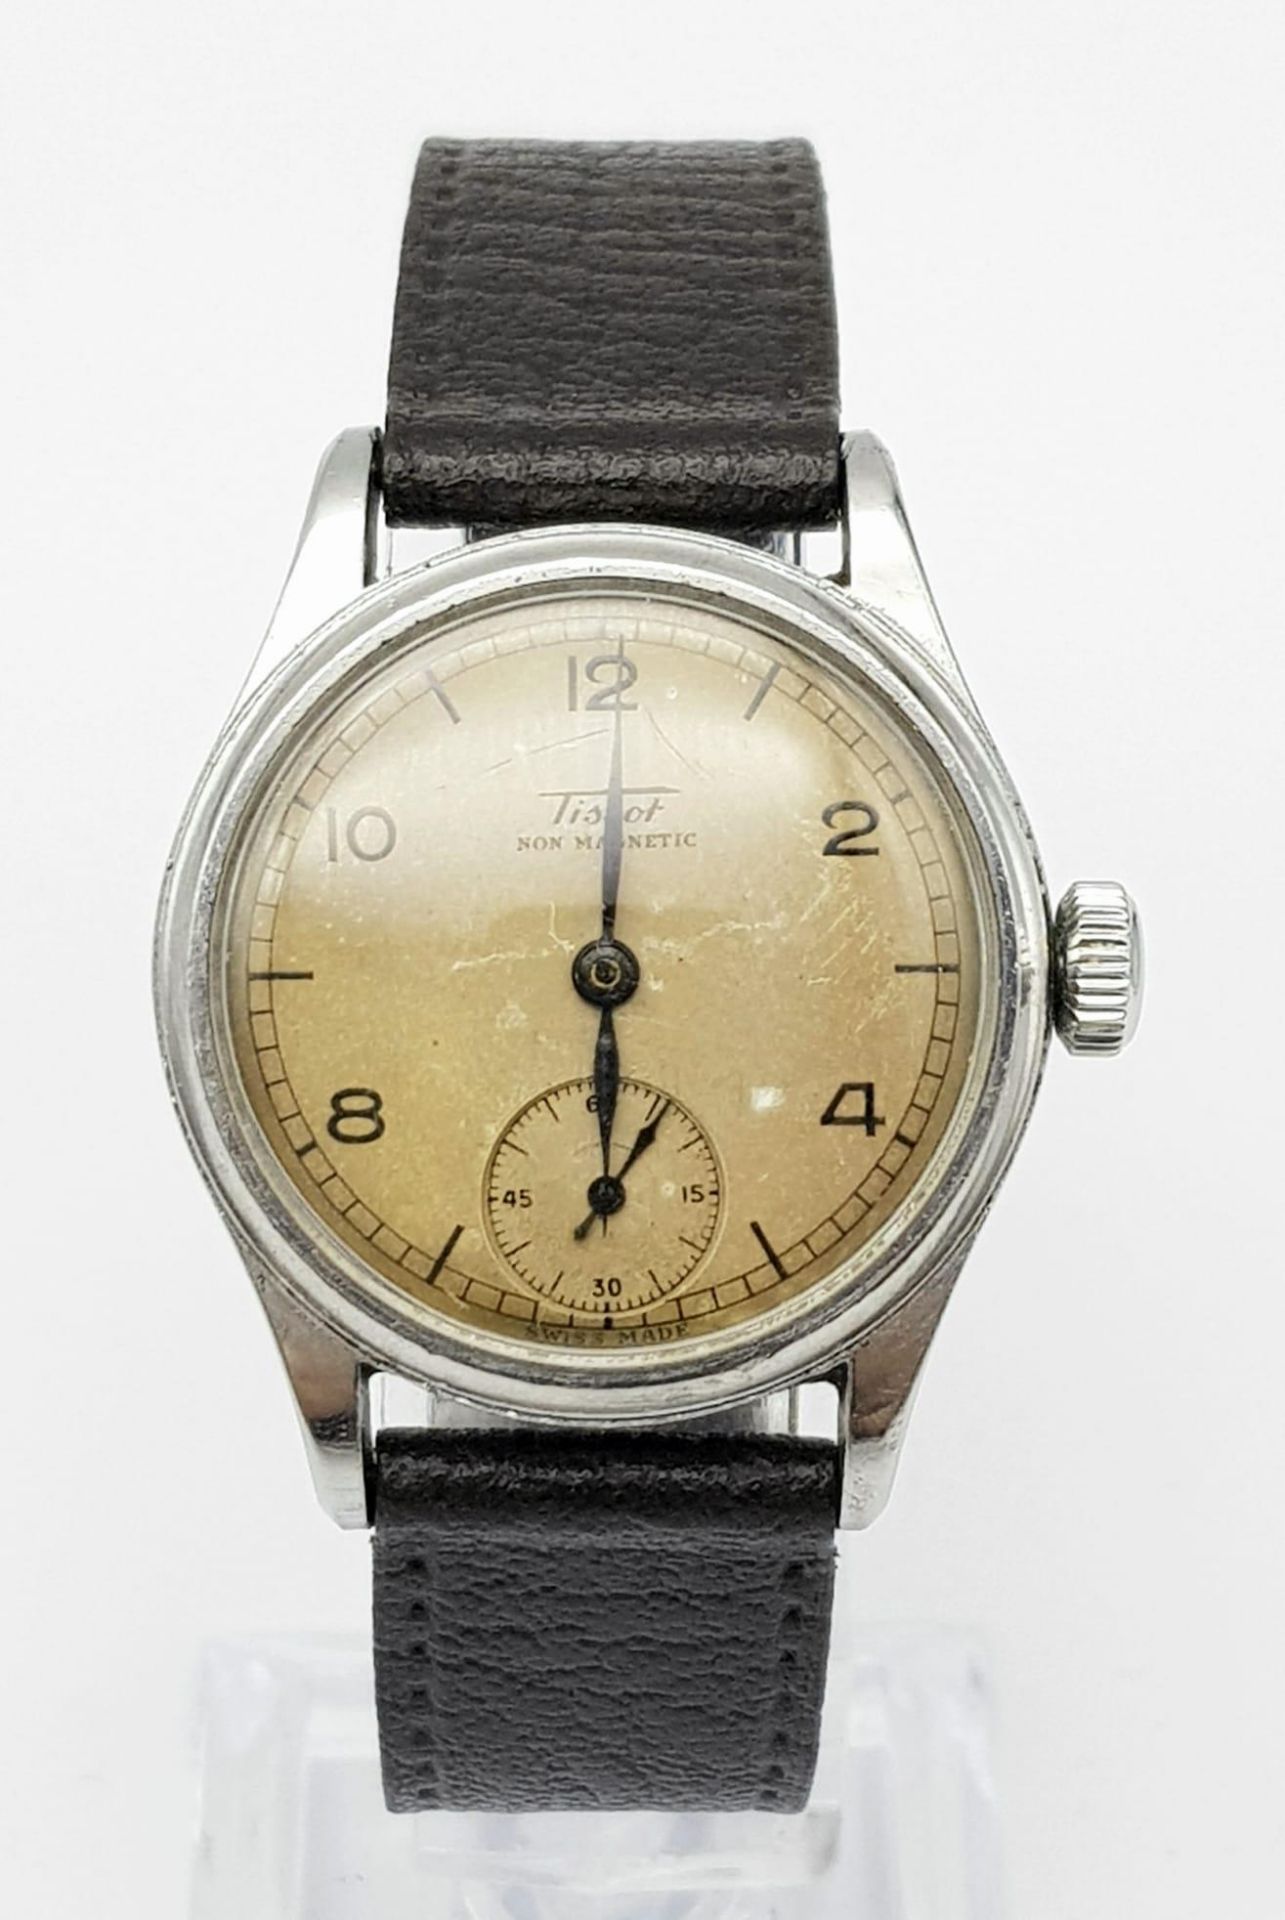 A Vintage Tissot Non-Magnetic Mechanical Gents Watch Black leather strap. Stainless steel case -